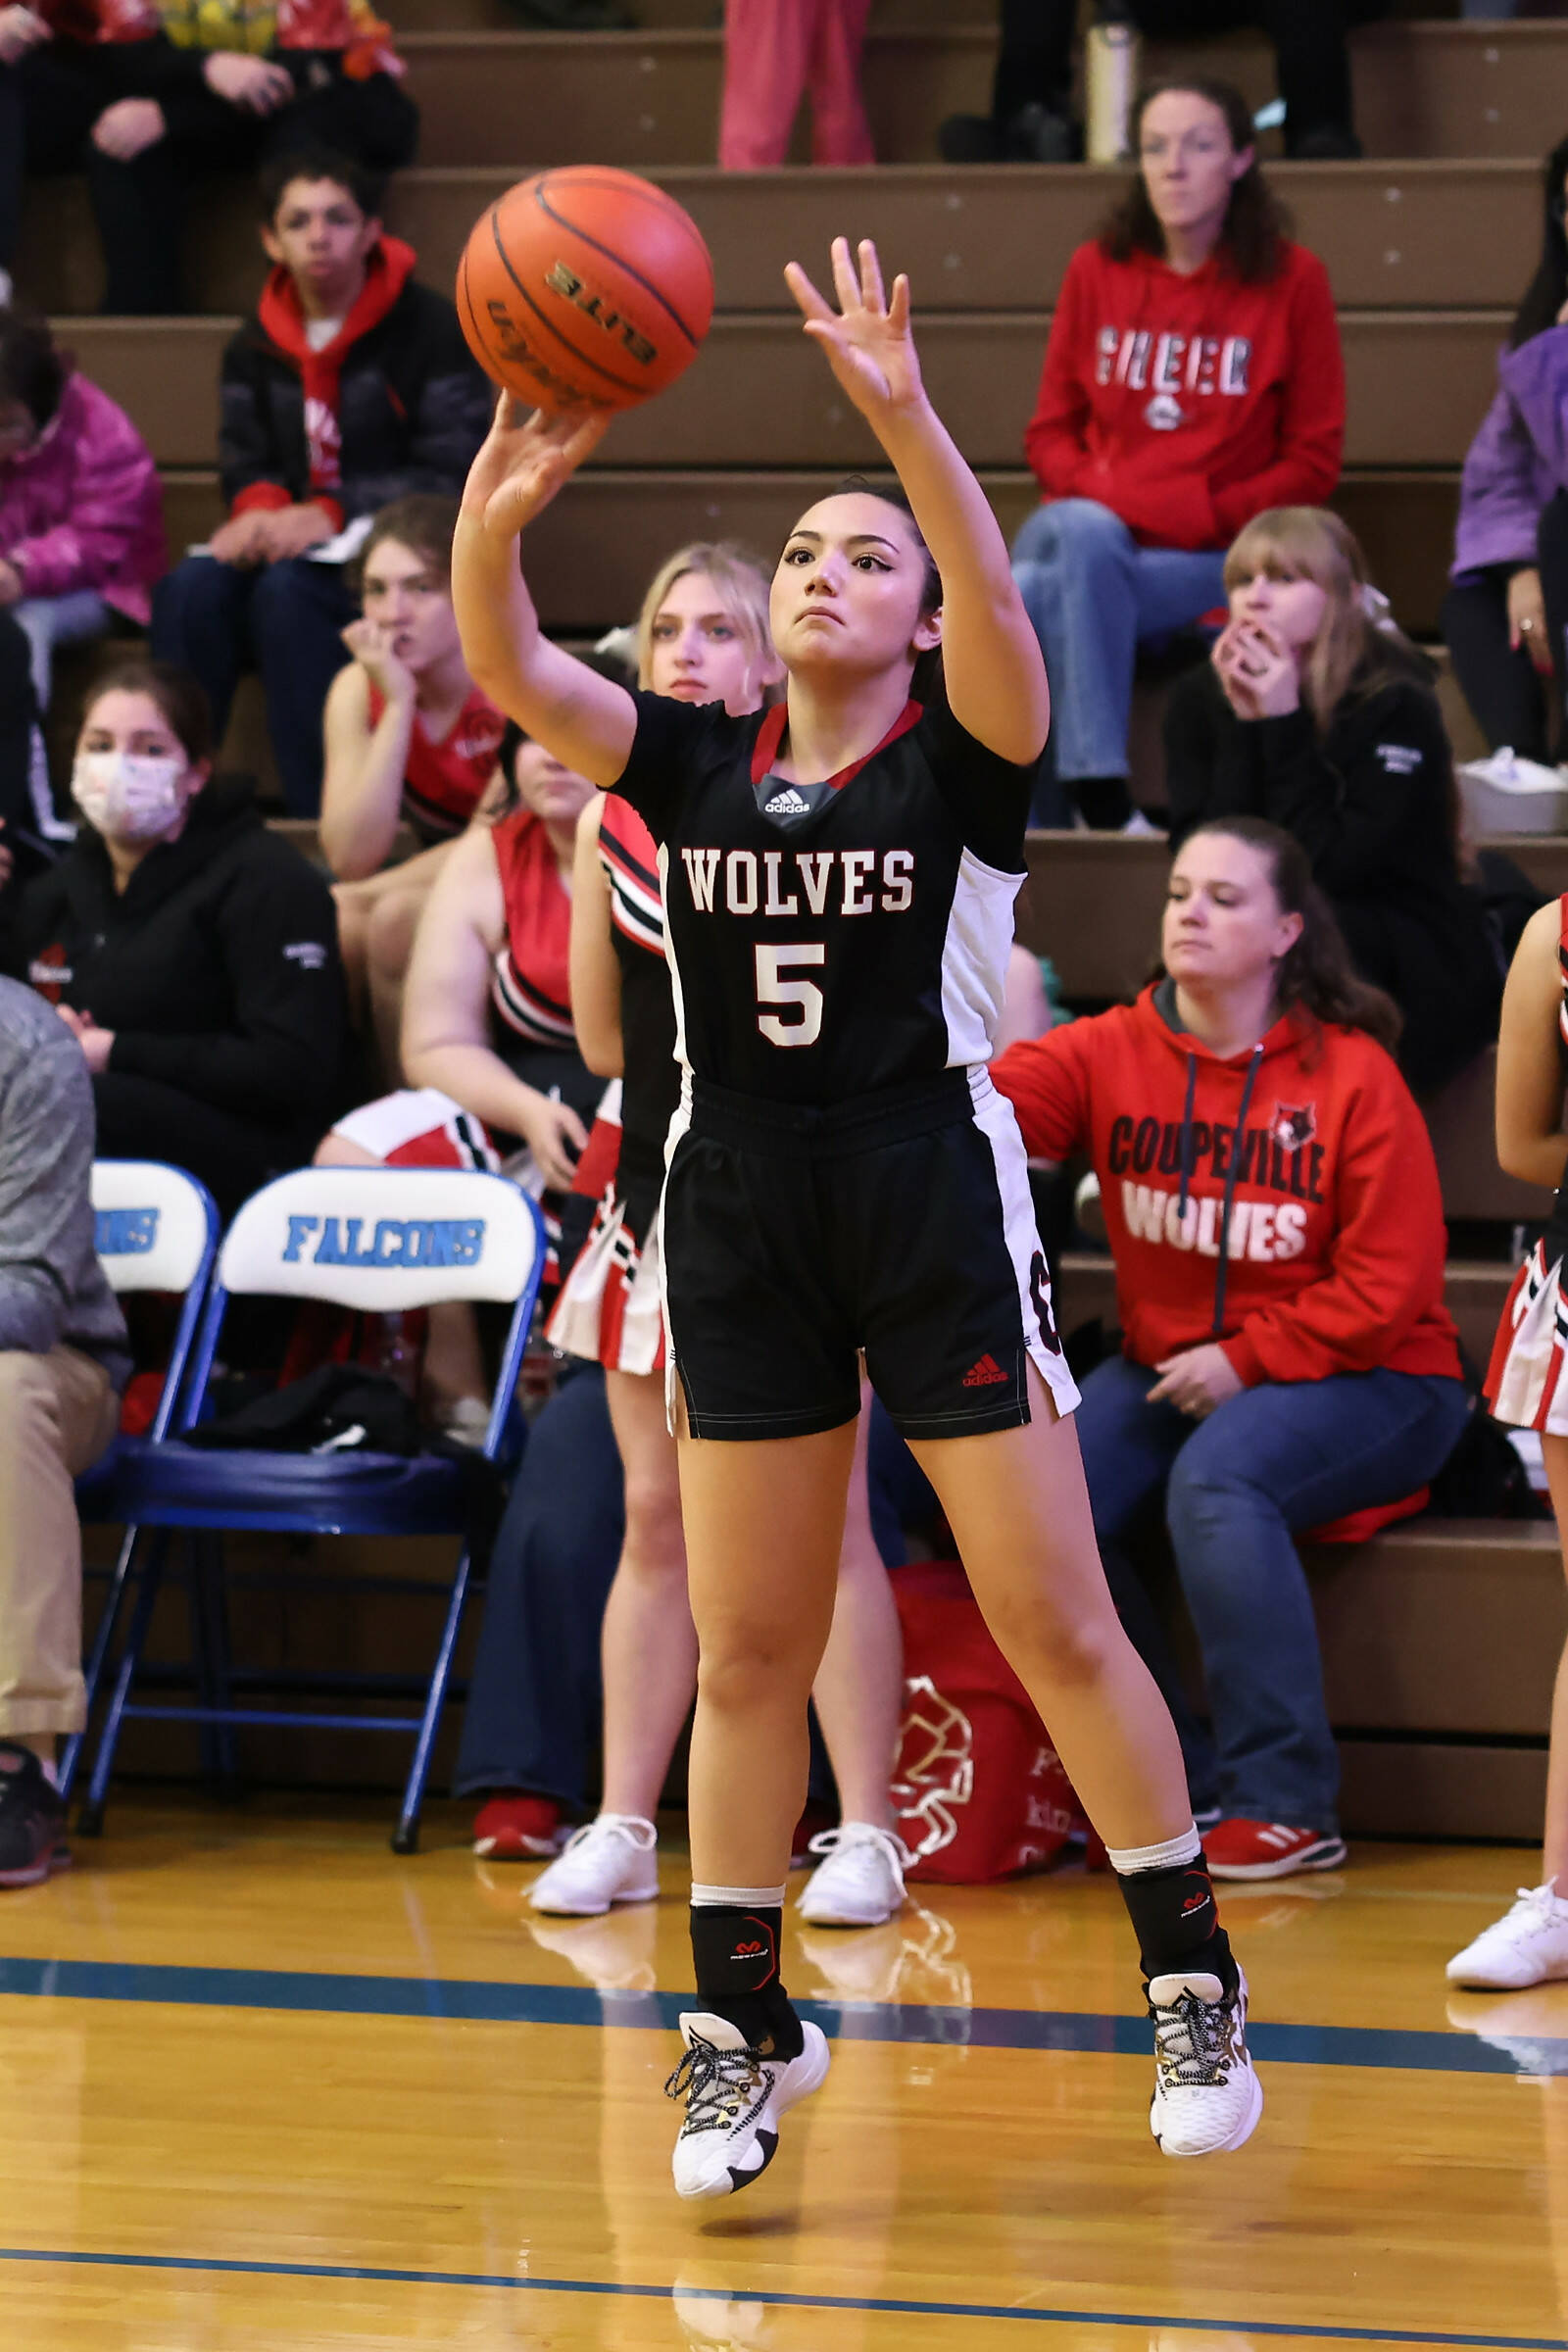 Photo by John Fisken
Coupeville athlete Alita Blouin takes a shot at a Nov. 30 game against South Whidbey High School. Coupeville defeated South Whidbey 46-22.